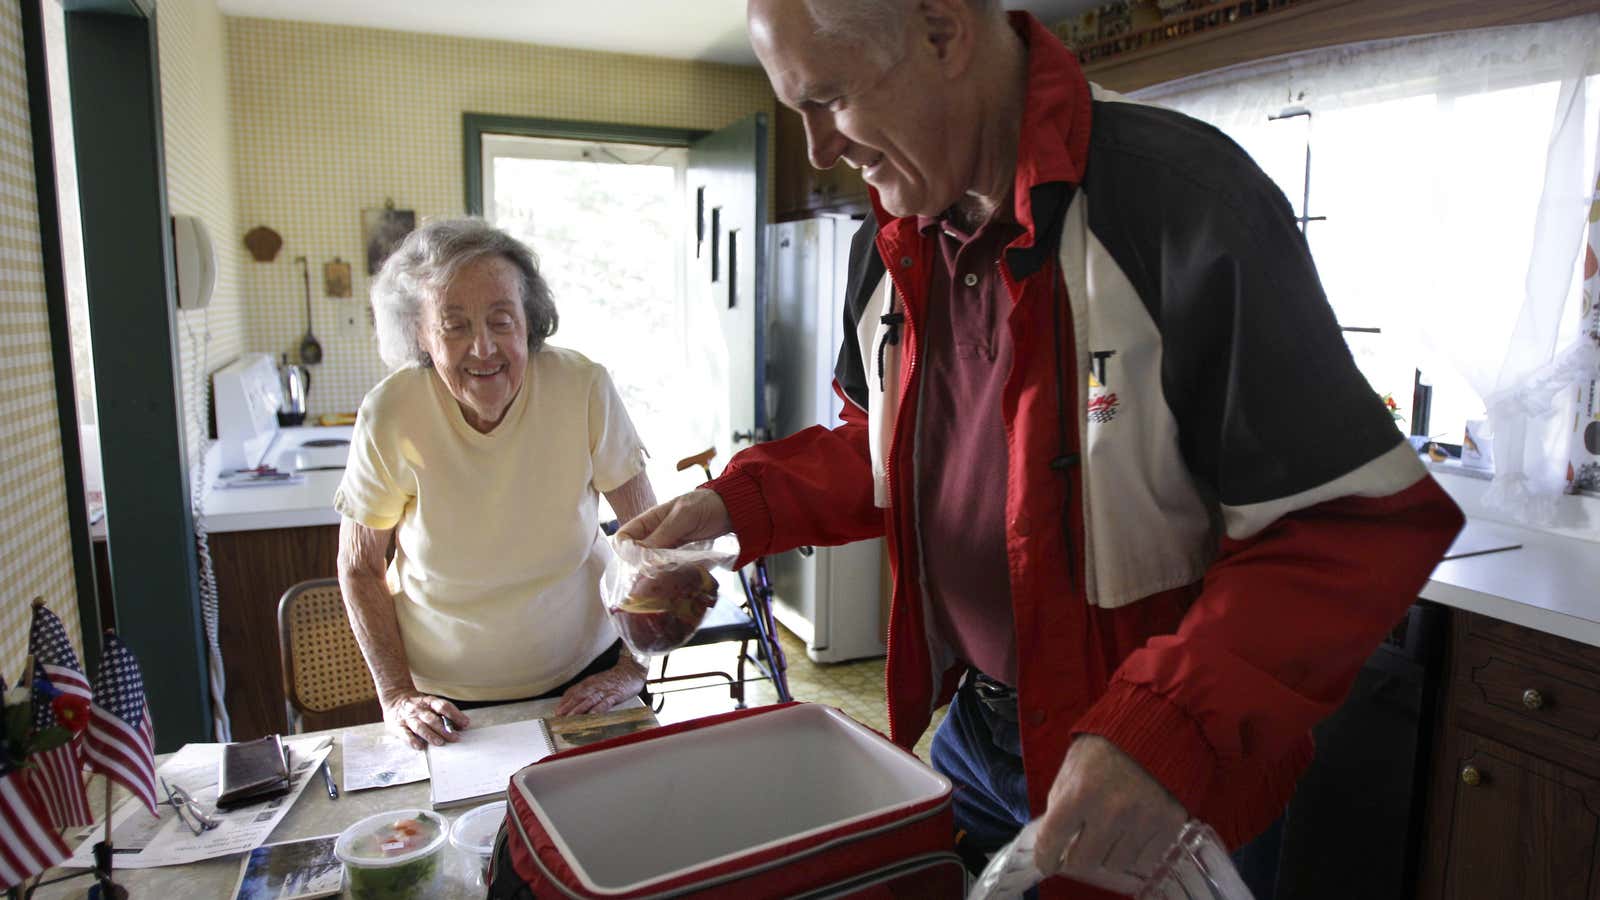 A Meals on Wheels recipient in Ohio.